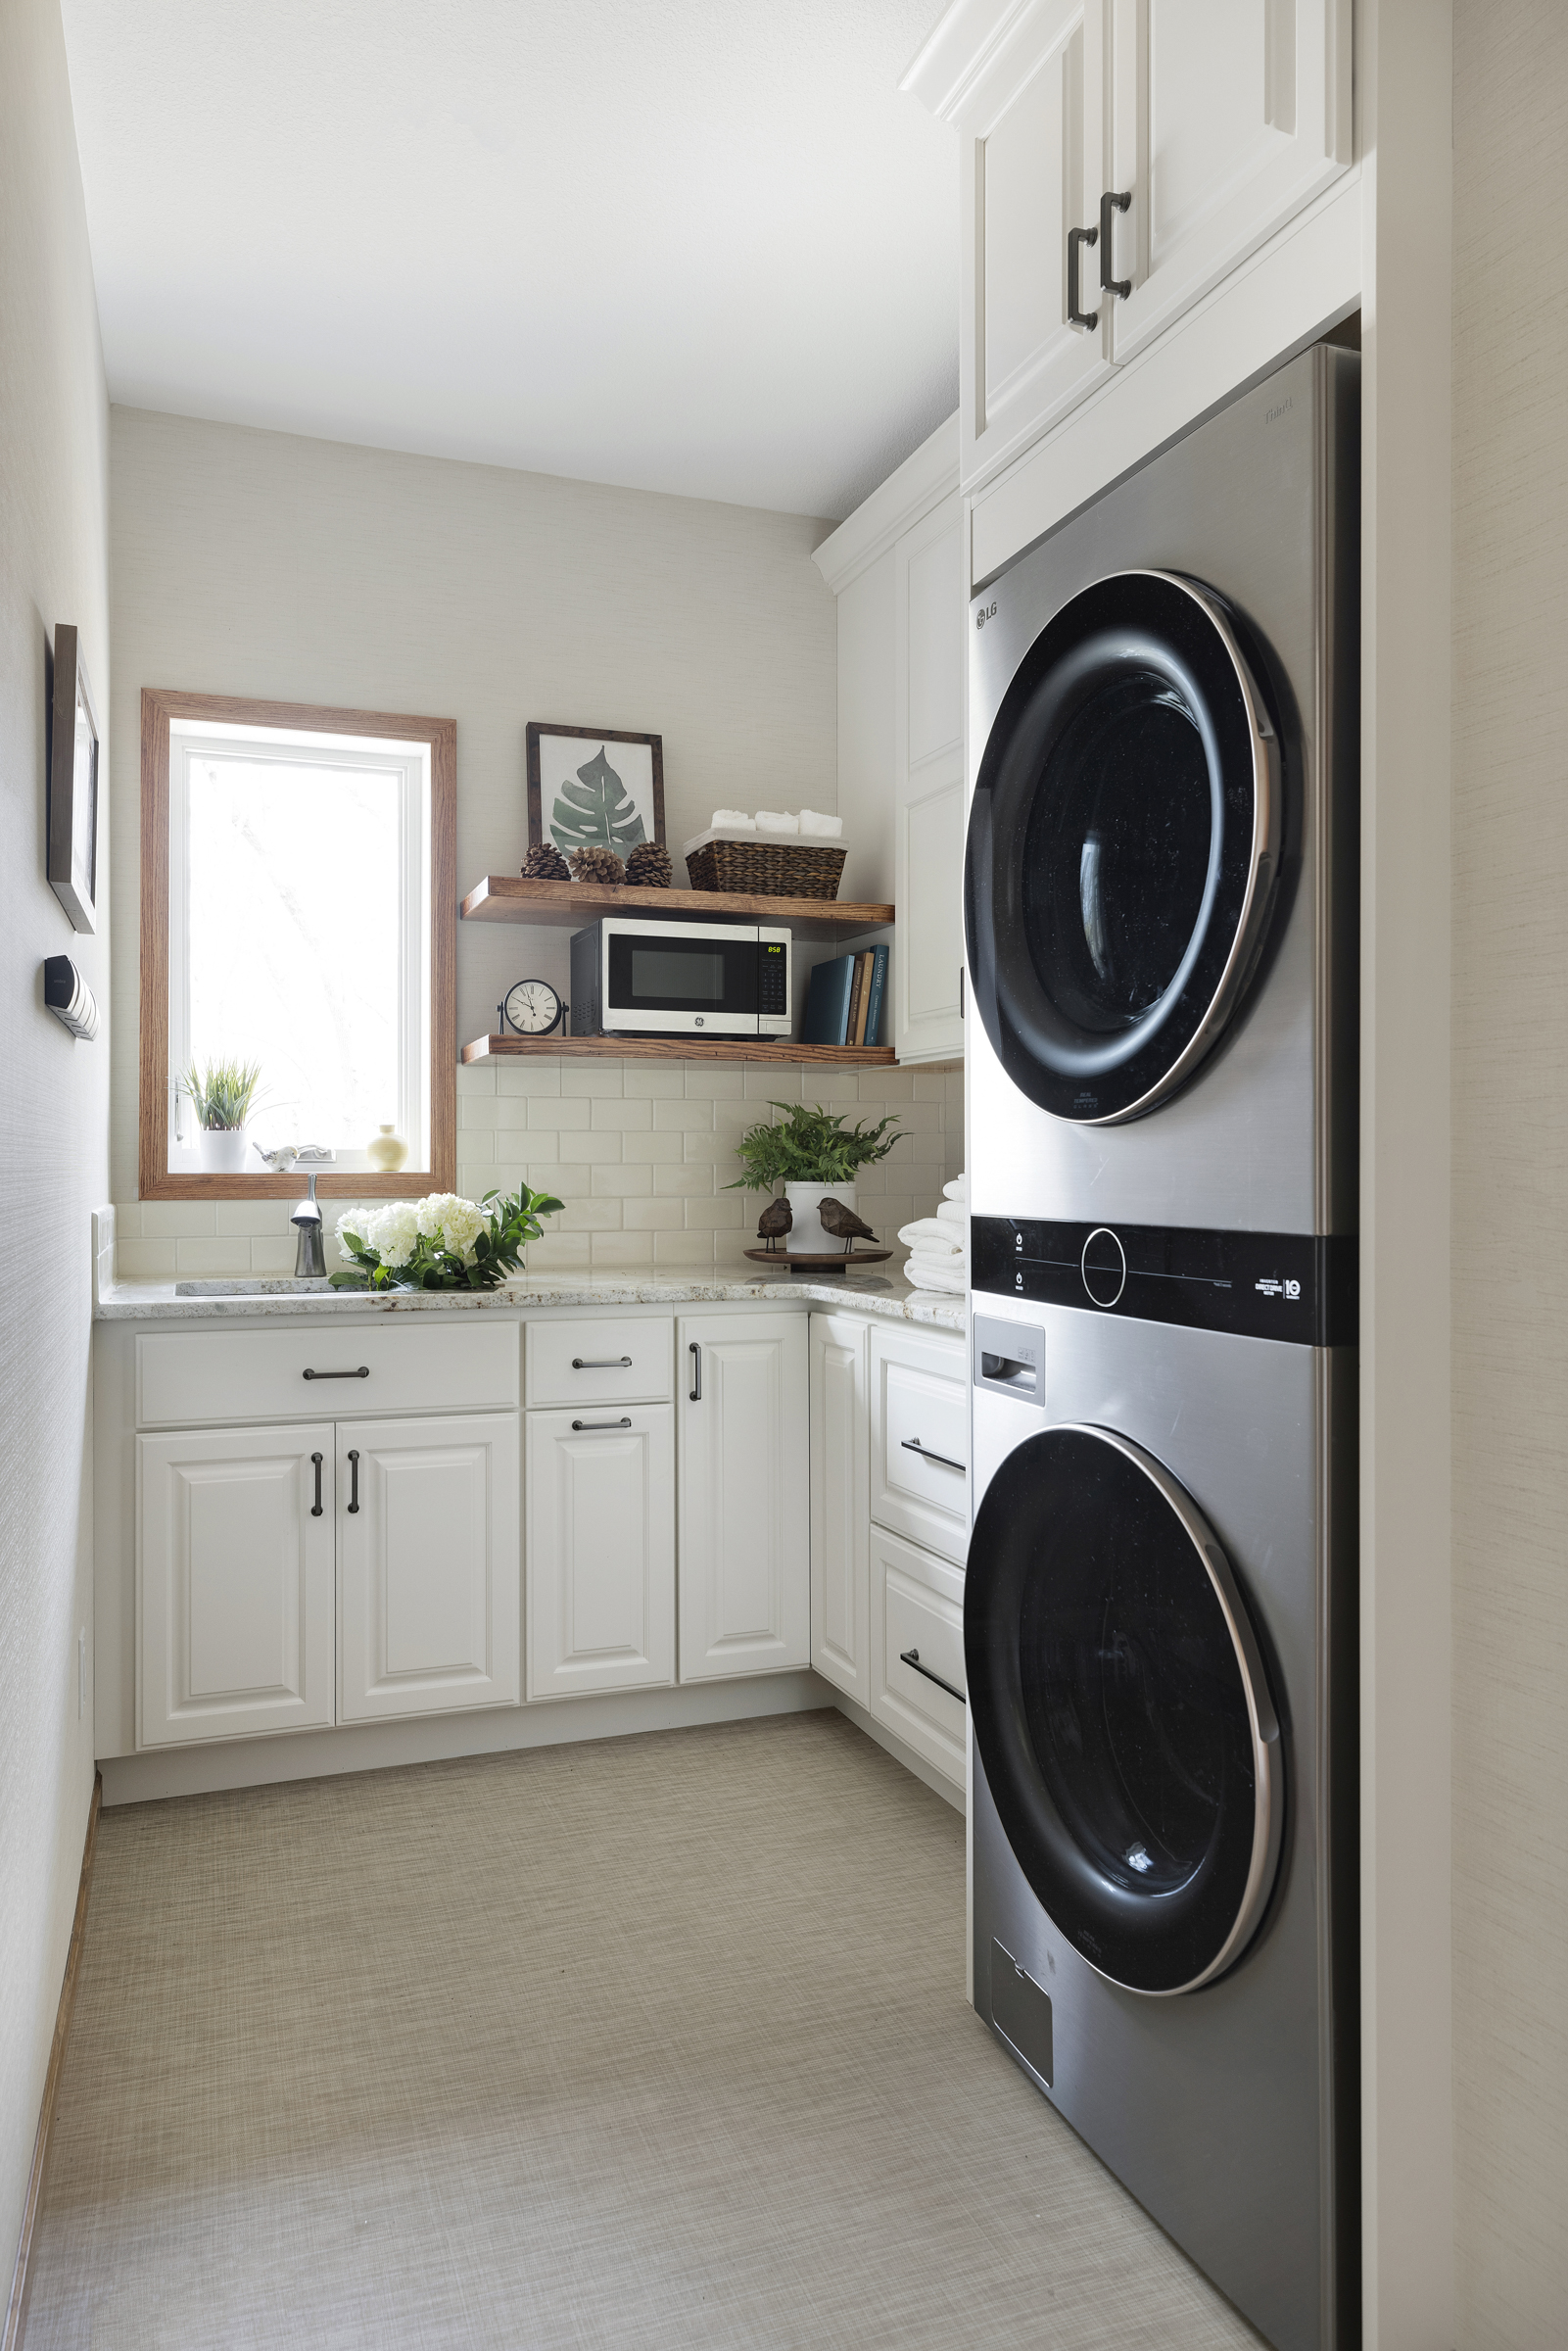 Laundry room after remodel with stacked washer and dryer, white cabinets, and subway tiles